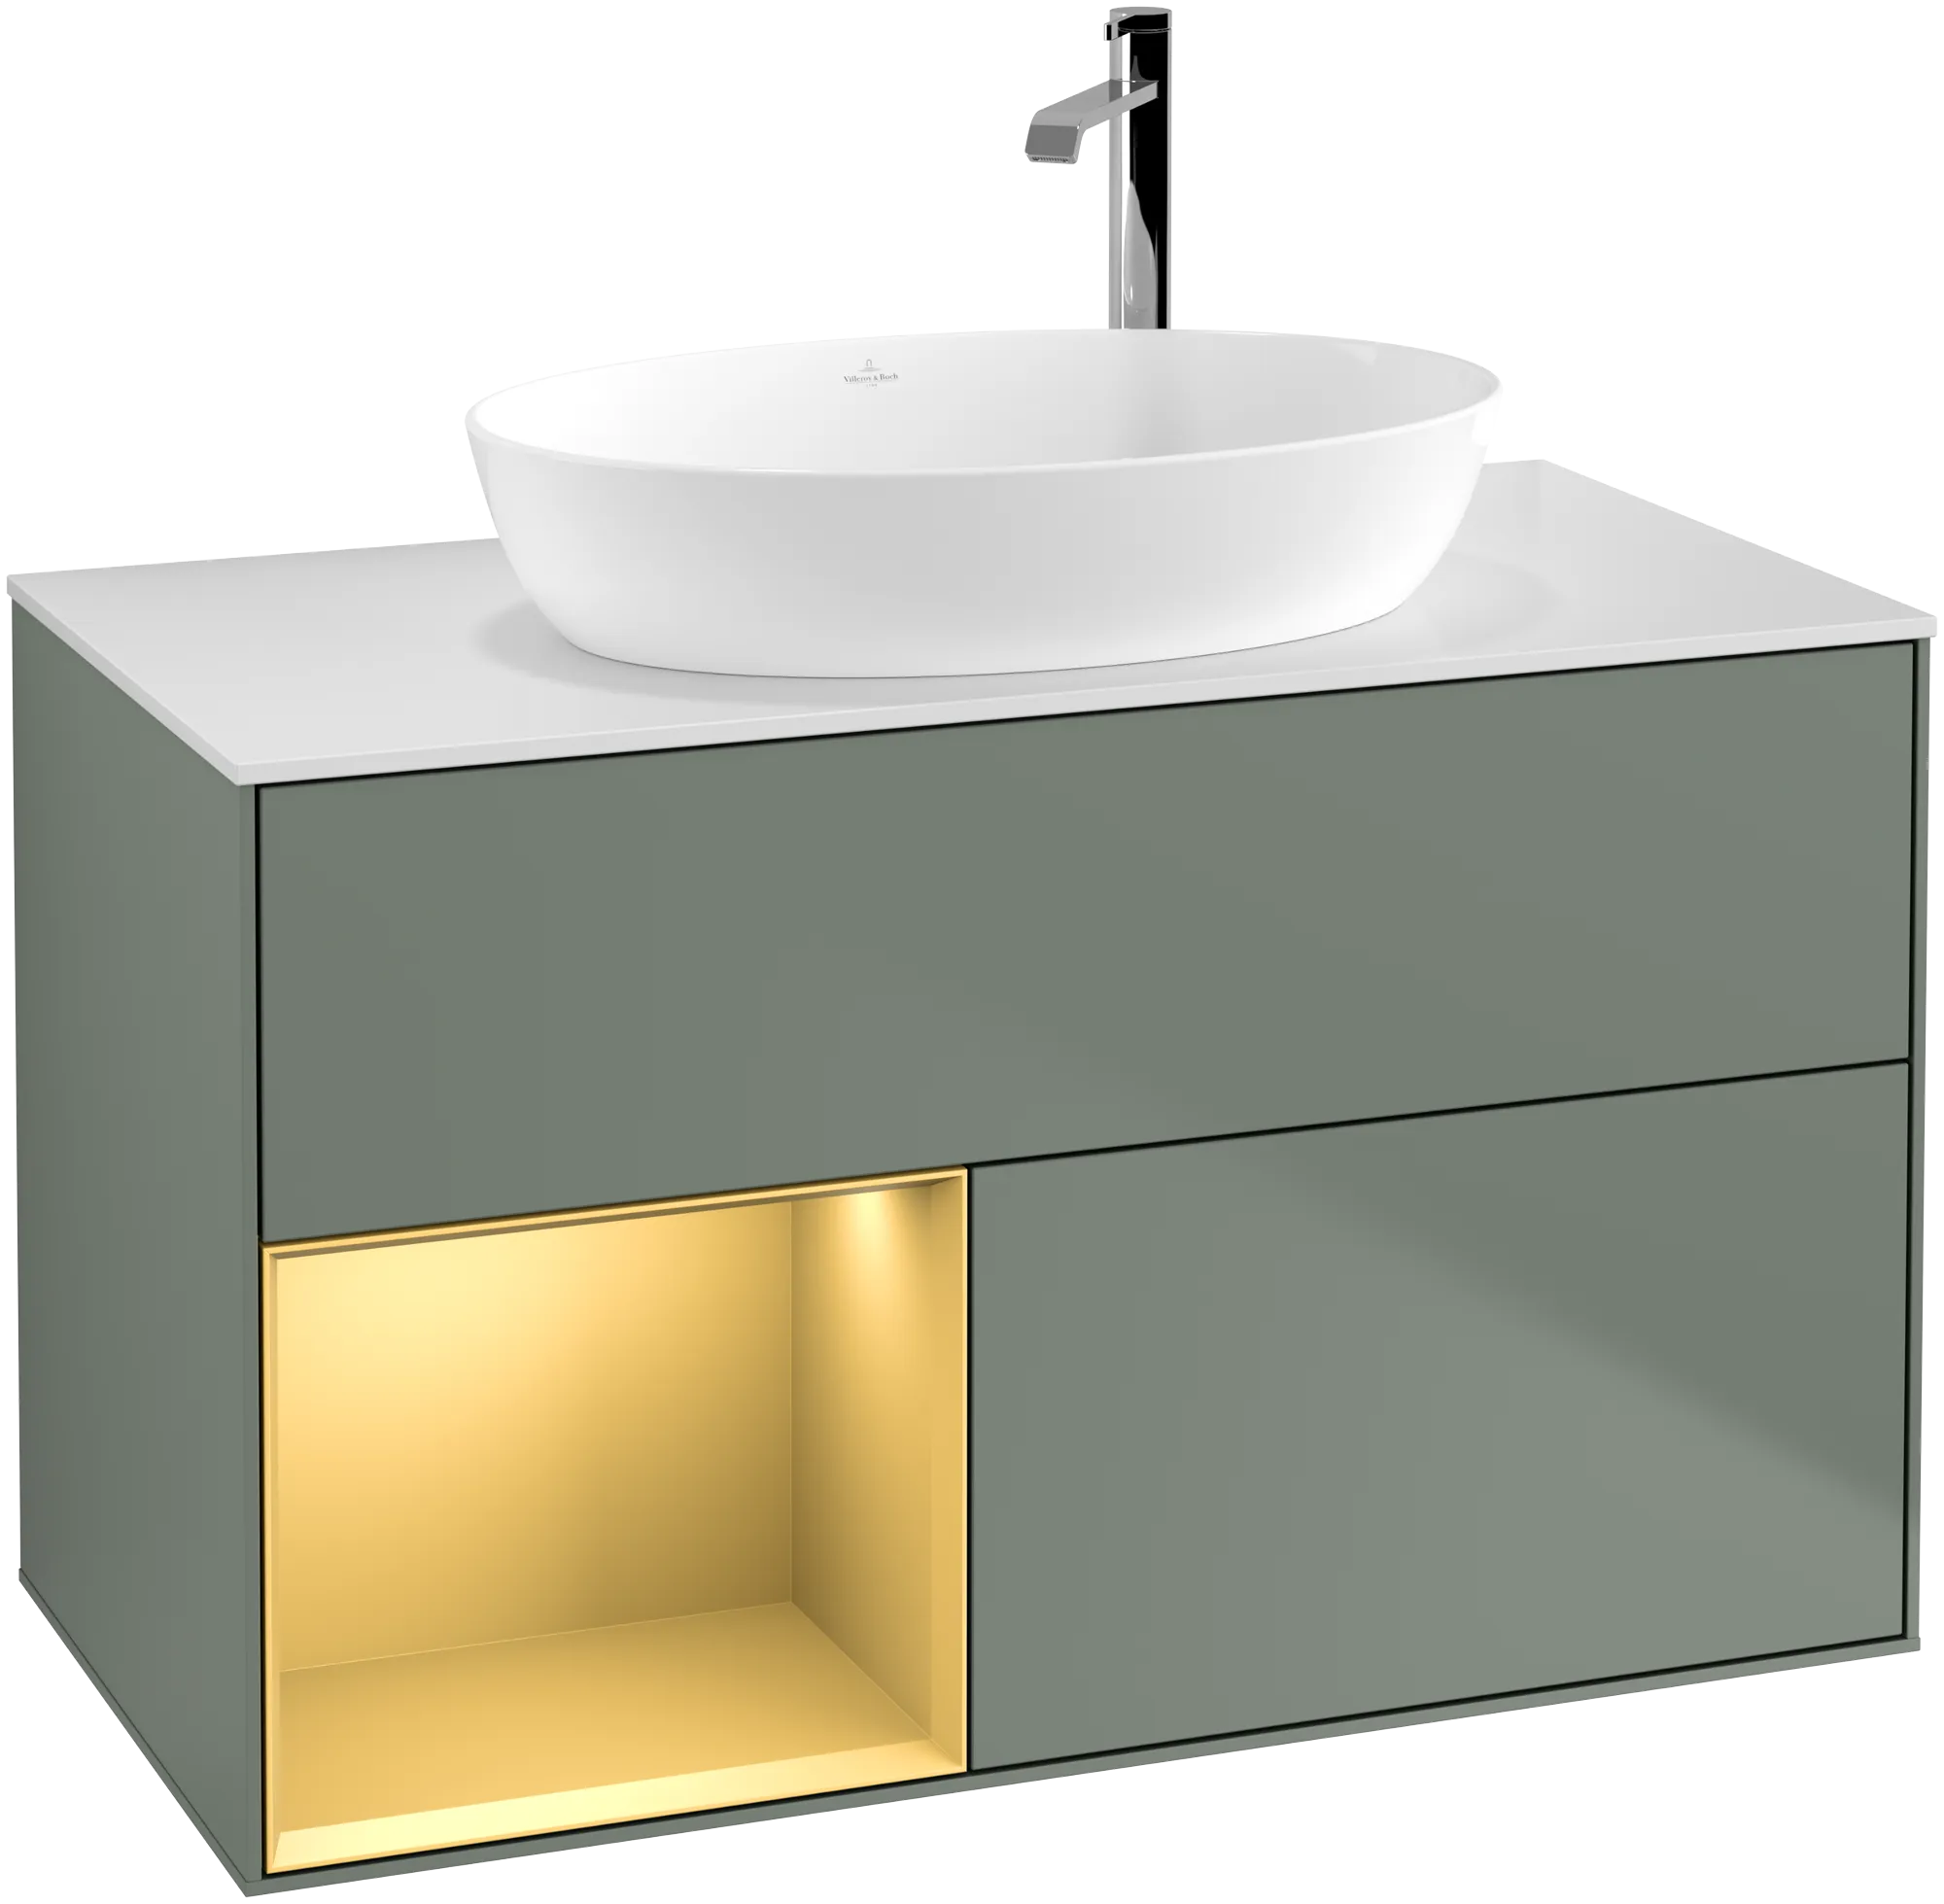 Picture of VILLEROY BOCH Finion Vanity unit, with lighting, 2 pull-out compartments, 1000 x 603 x 501 mm, Olive Matt Lacquer / Gold Matt Lacquer / Glass White Matt #G891HFGM